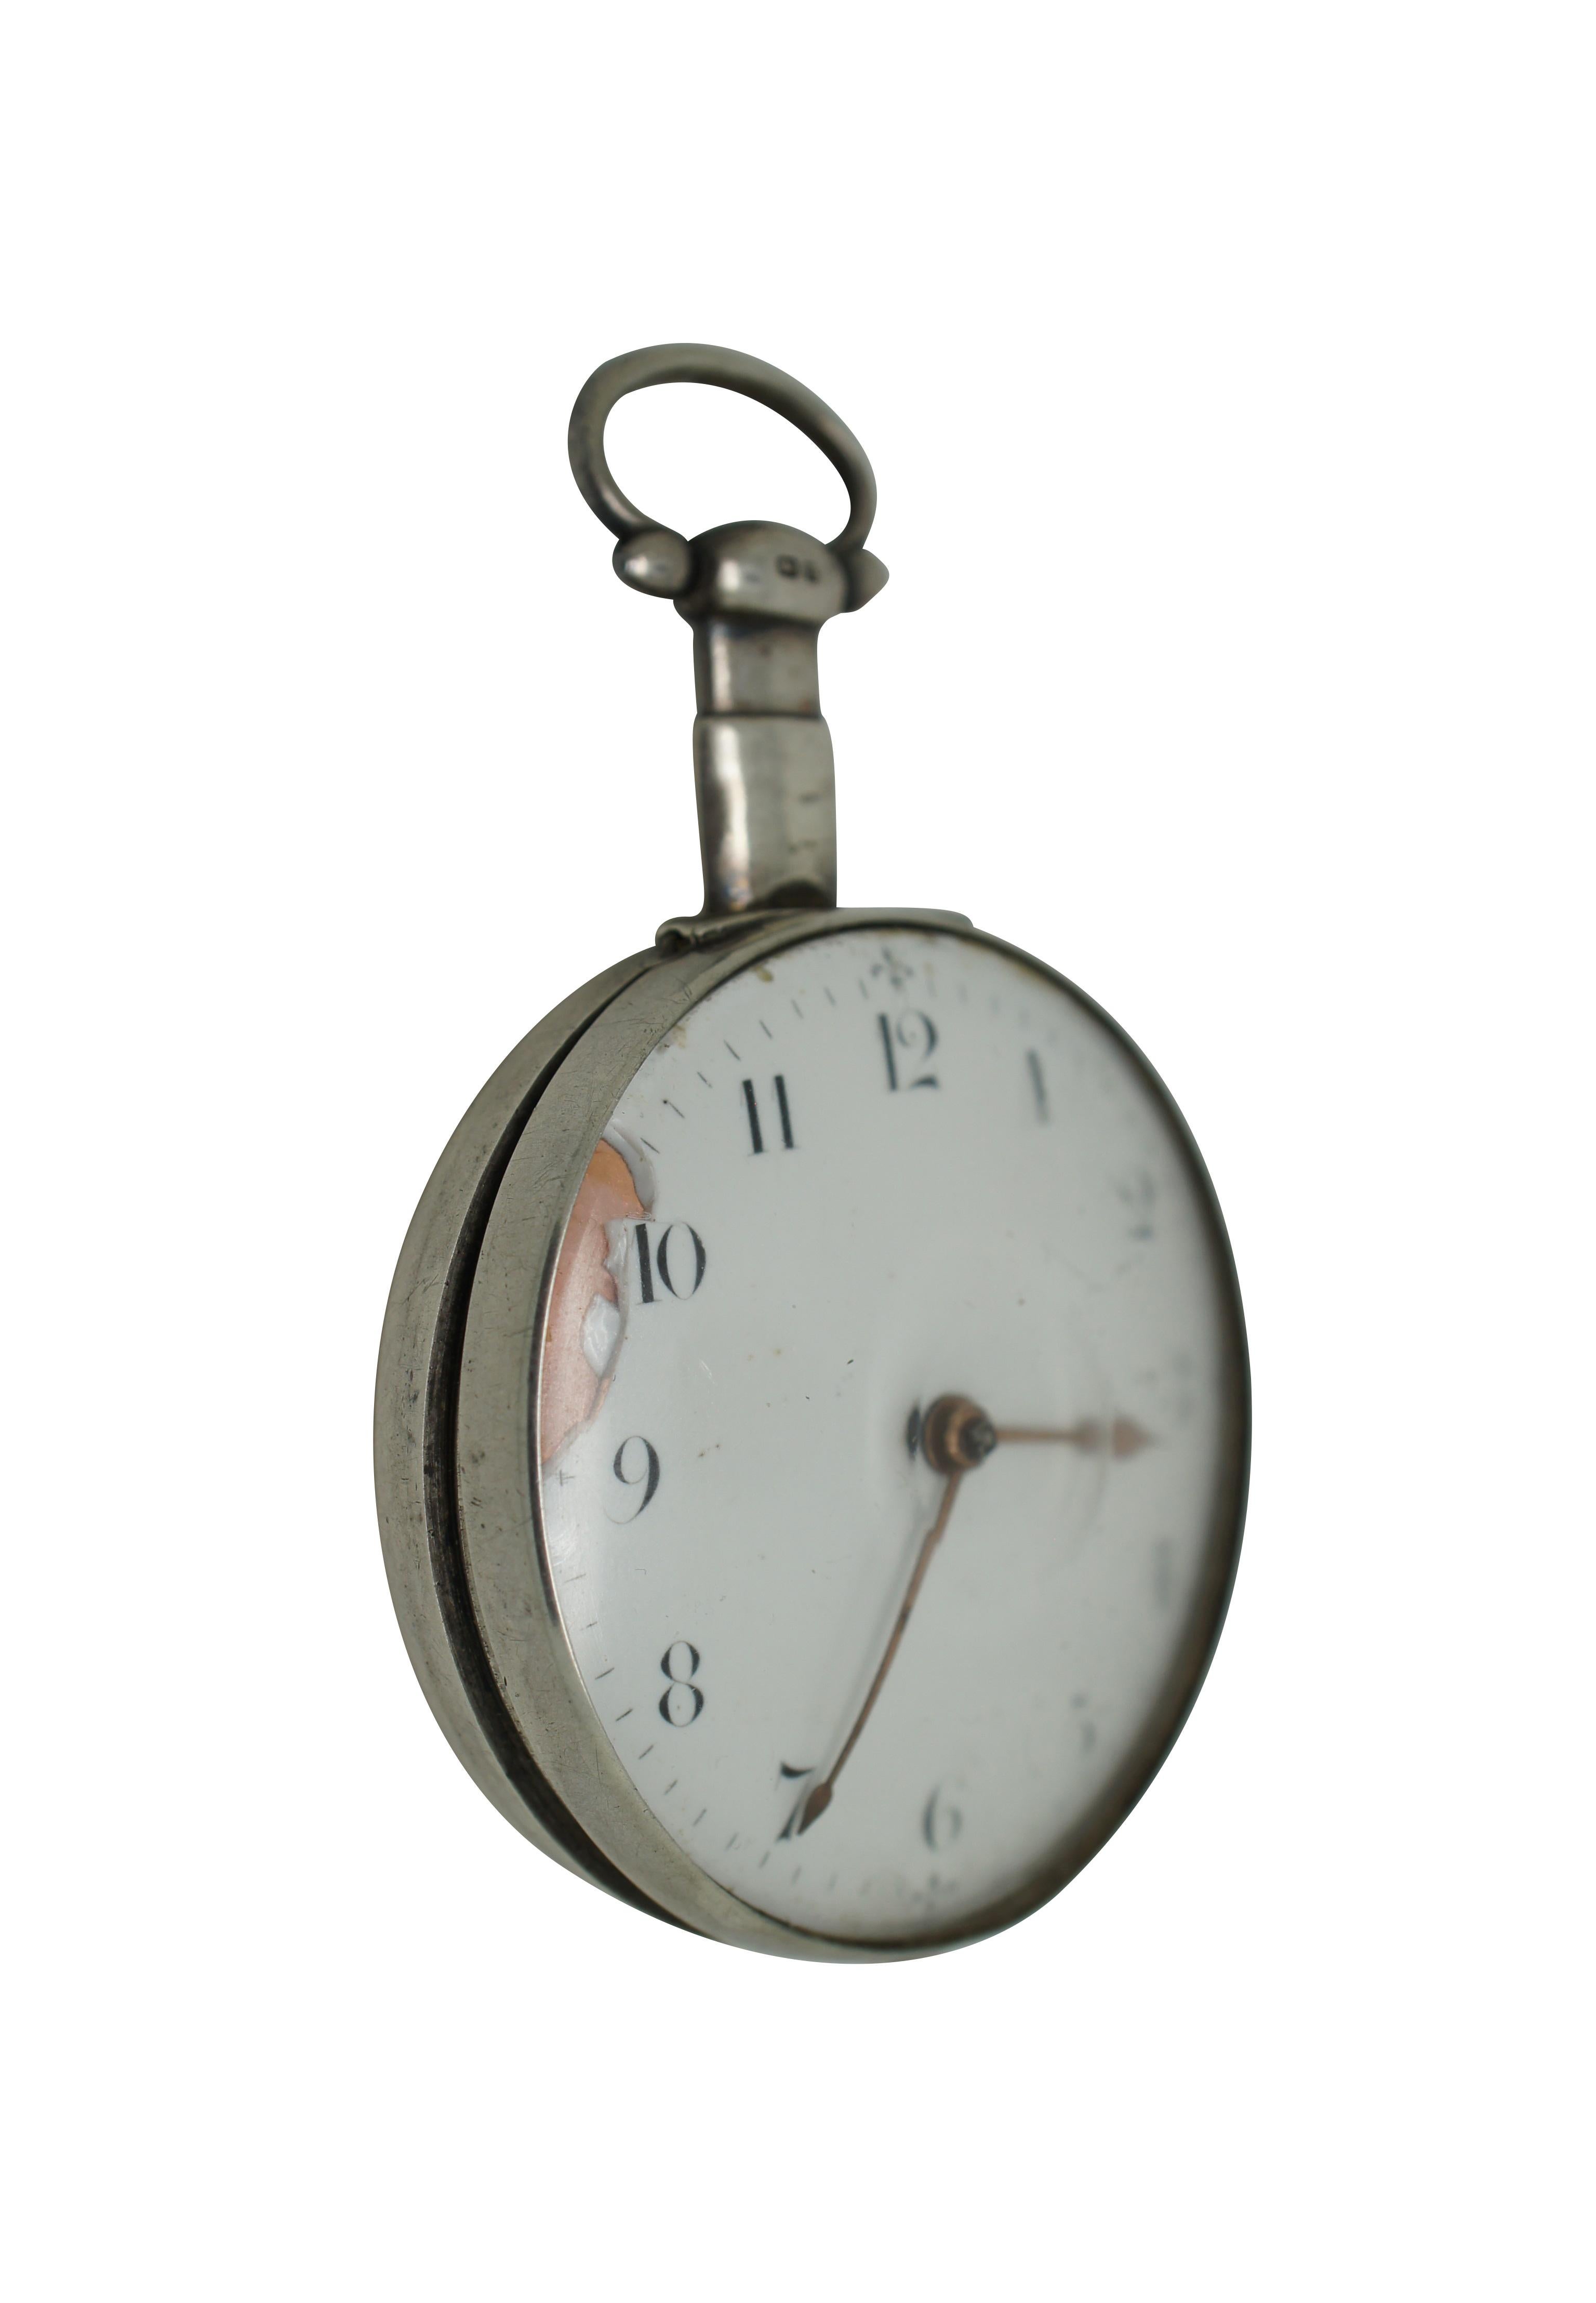 Antique early 19th century pocket watch. Sterling silver case with glass front. Swivel panel on reverse reveals key hole for winding. White porcelain face with copper hands, Arabic numeral and fleur de lis accents at the quarter hours. City mark and